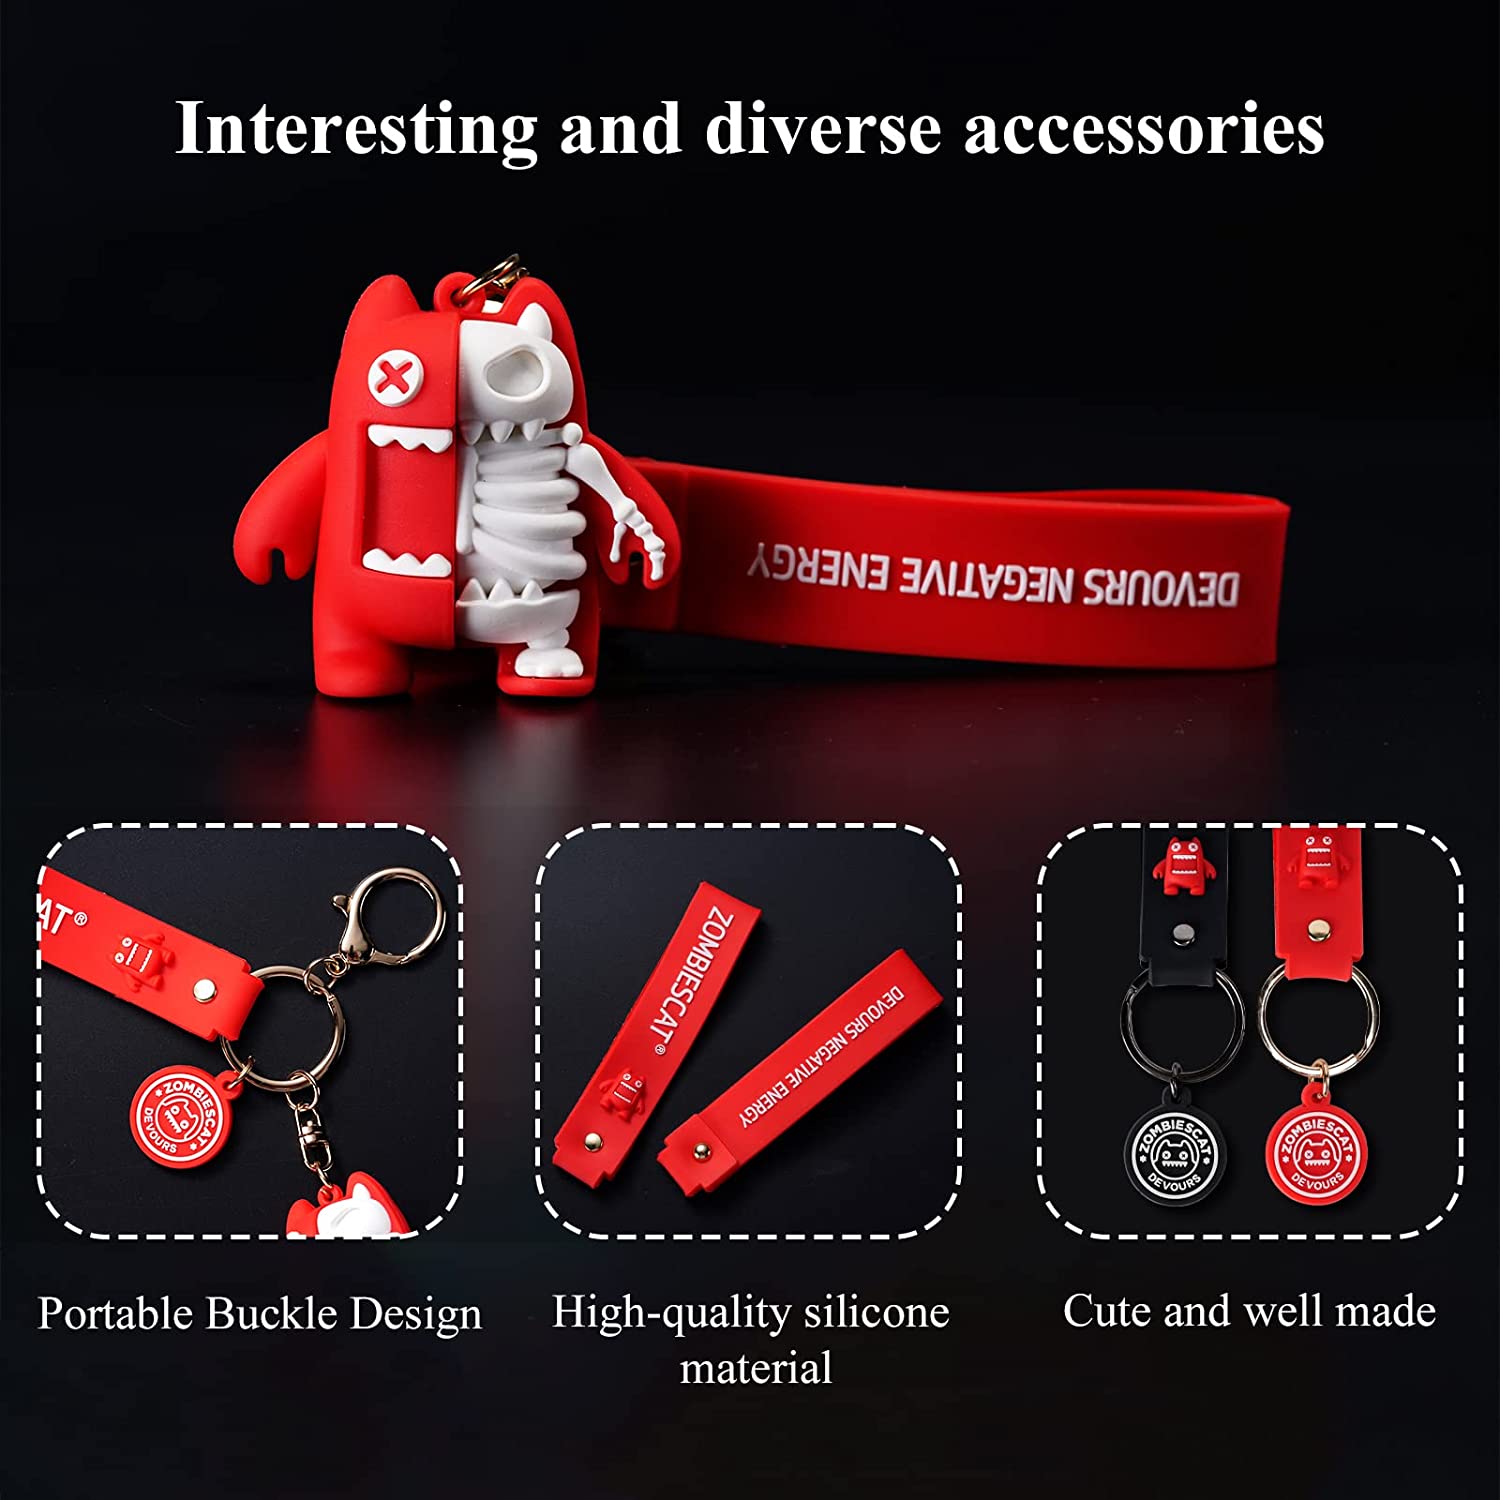 Women's High-tech Accessories And Keychains